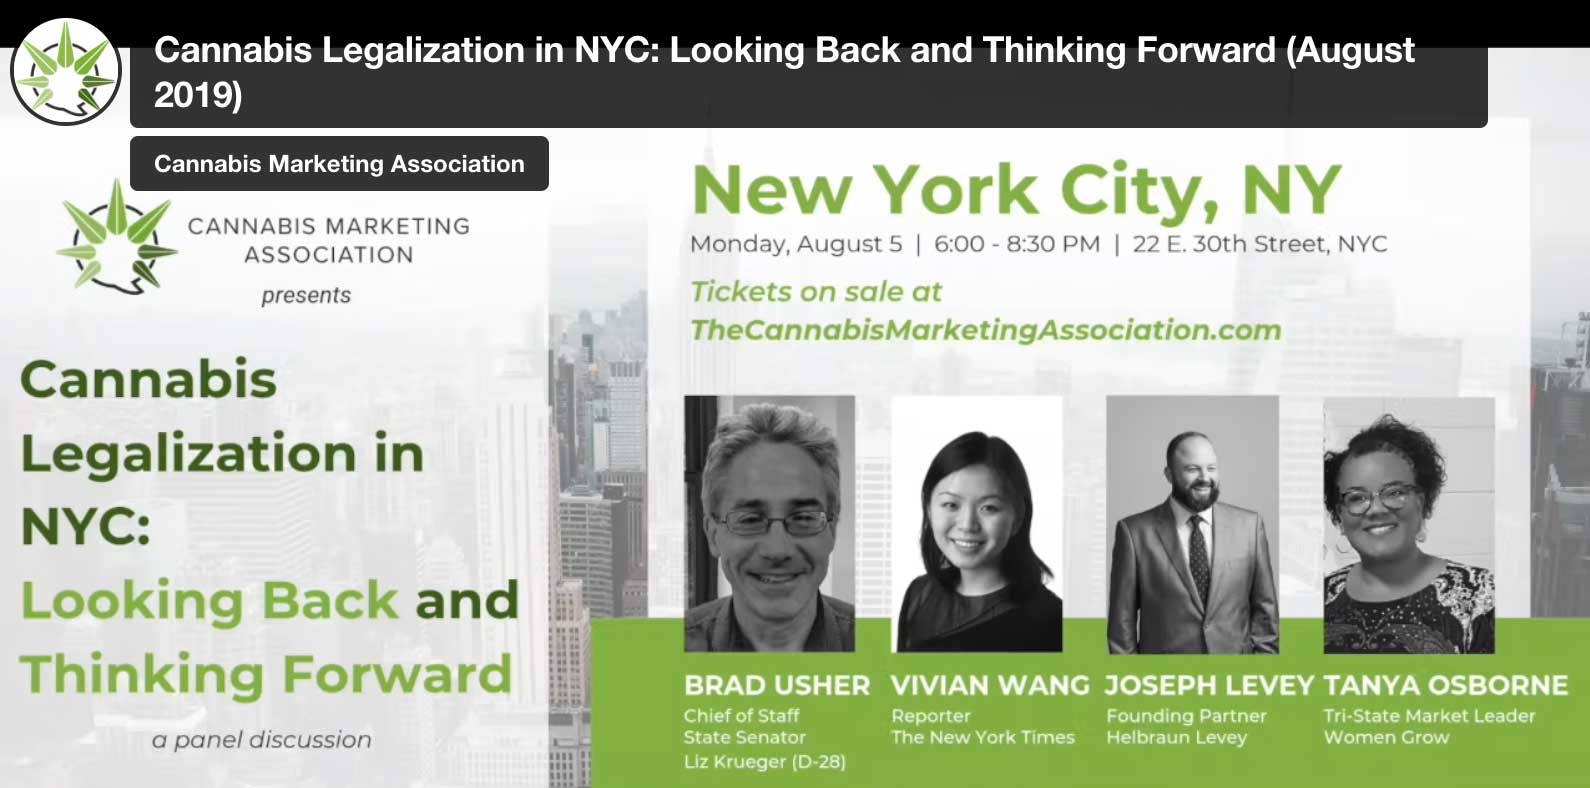 CMA: Cannabis Legalization in NYC: Looking Back and Thinking Forward, August 2019